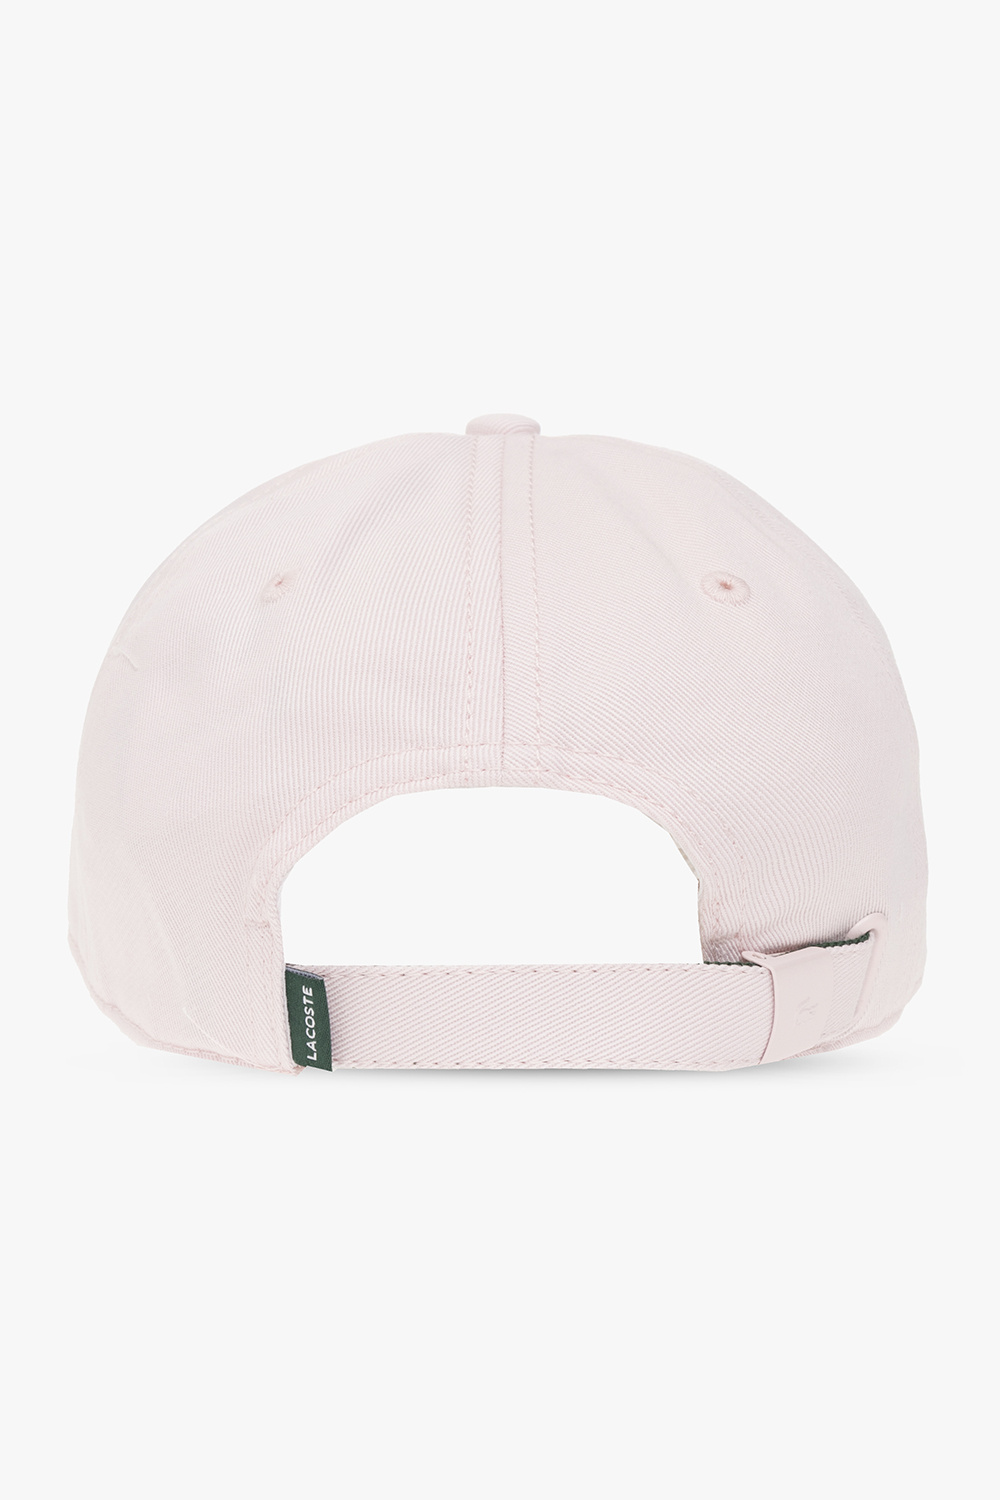 IetpShops Japan - collaborated Cap atmos Serve on - with Lacoste new with Lacoste logo and collection Pink Serve a